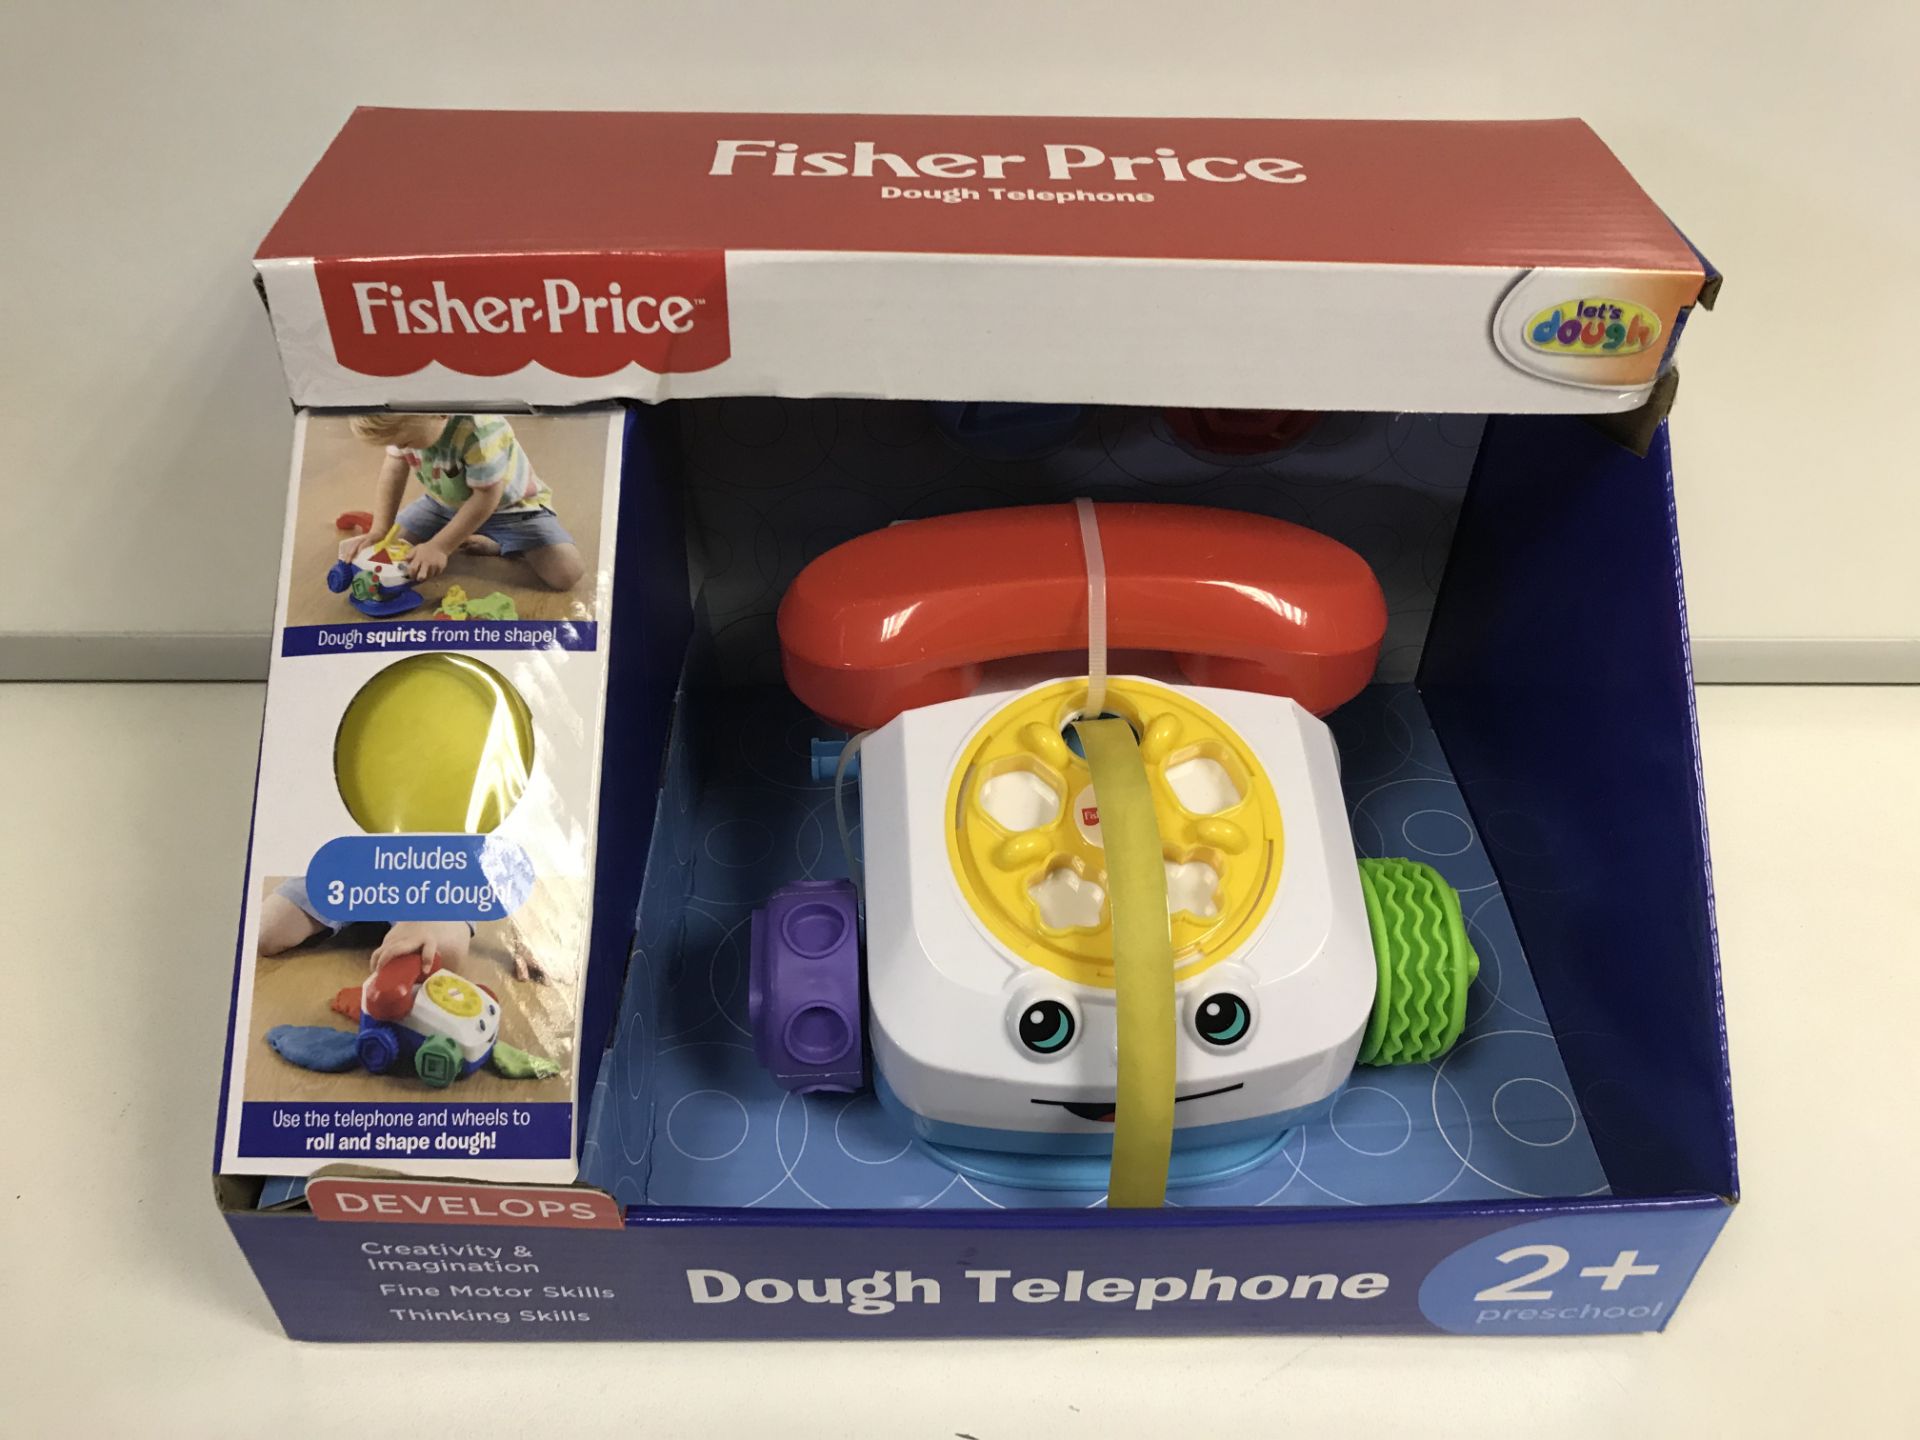 6 X BRAND NEW BOXED FISHER PRICE DOUGH TELEPHONES IN 1 BOX